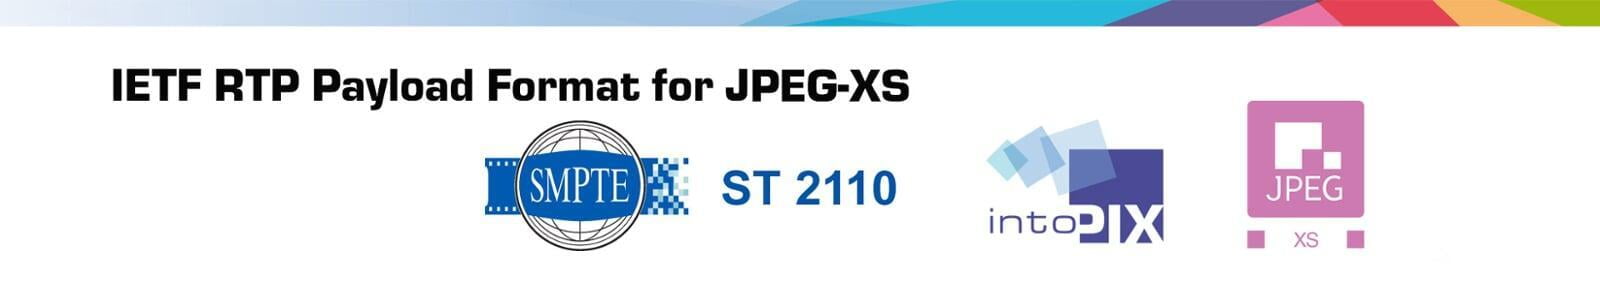 IETF RTP Payload Format for JPEG-XS (RFC 9134) is published!